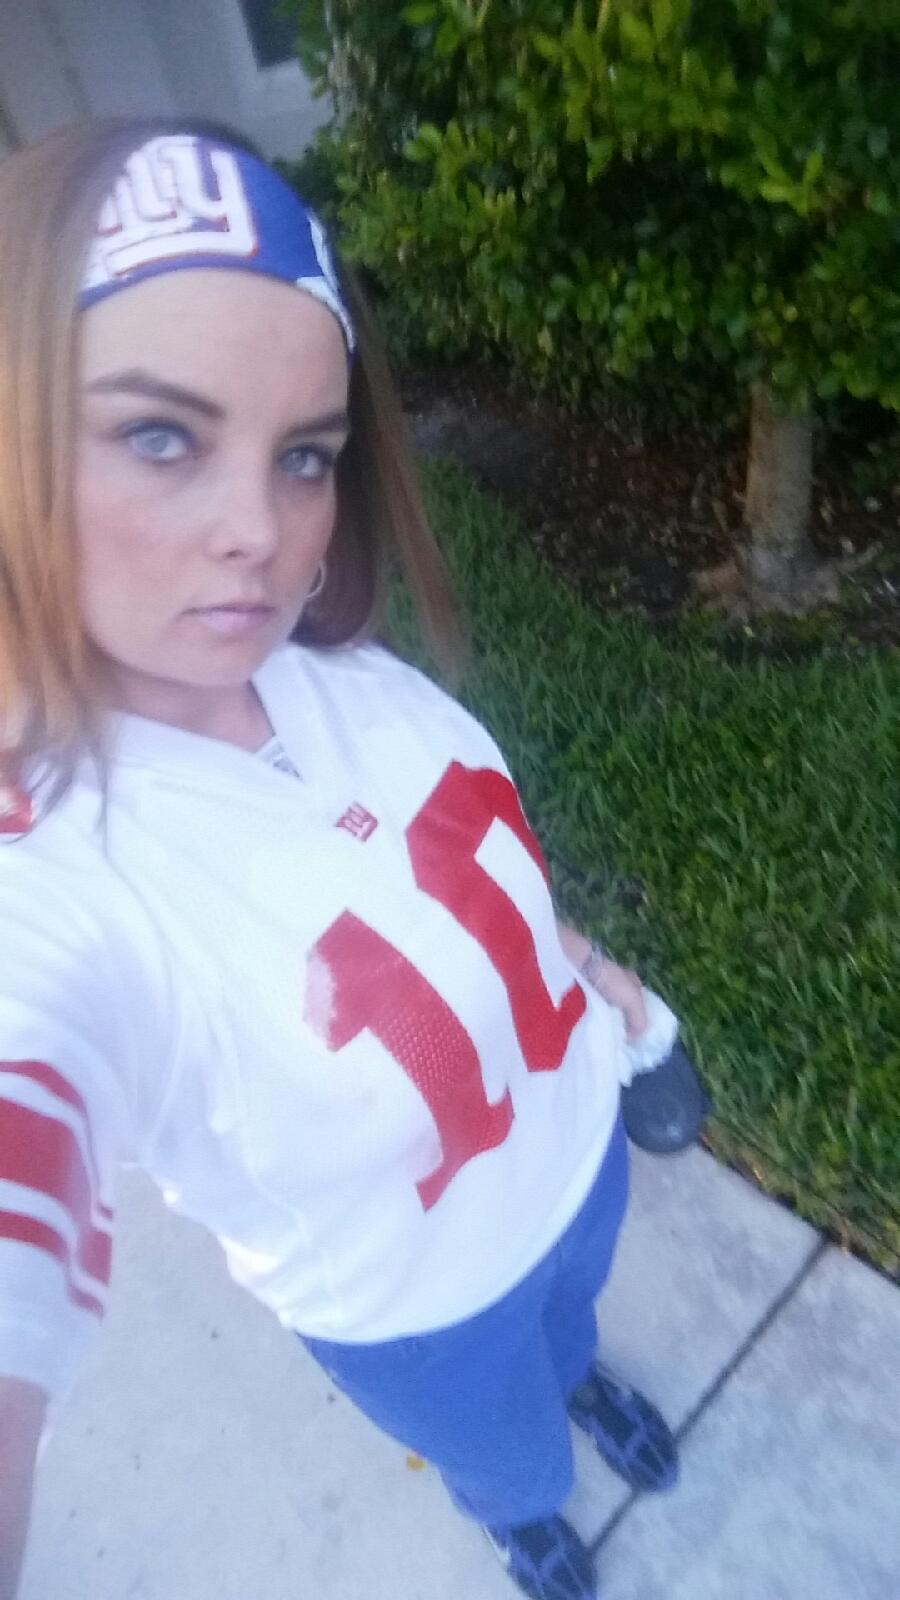 VIP Krystal. Don't mind the NY Giants jersey we all know they suck! 